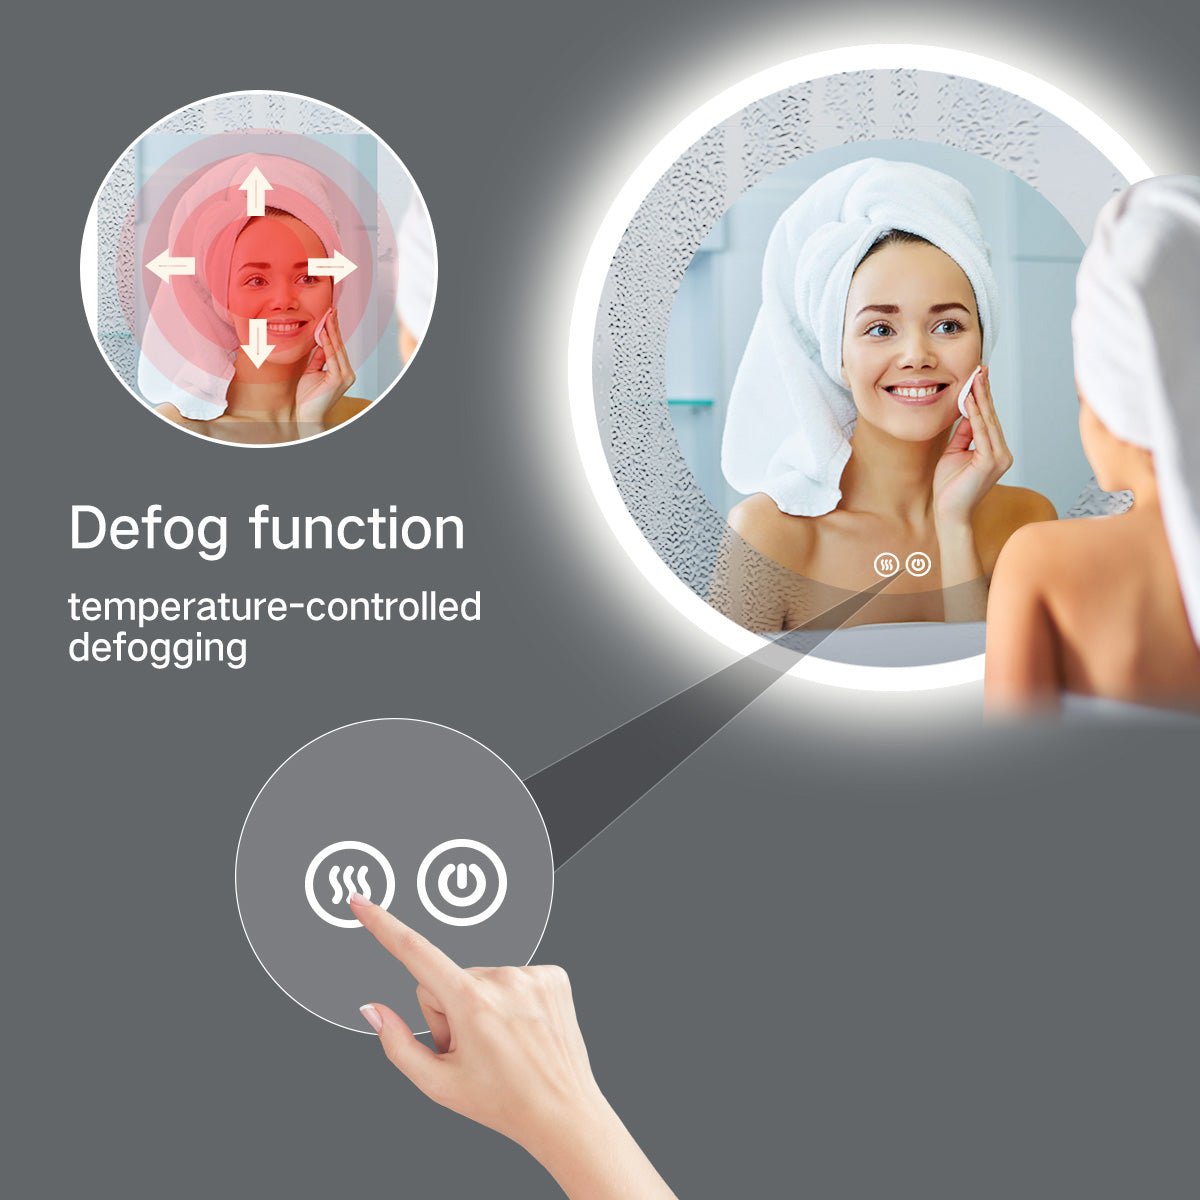 Round LED Mirror with a Demister, Three Brightness Levels, And A Convenient Dimmer - Mirror World